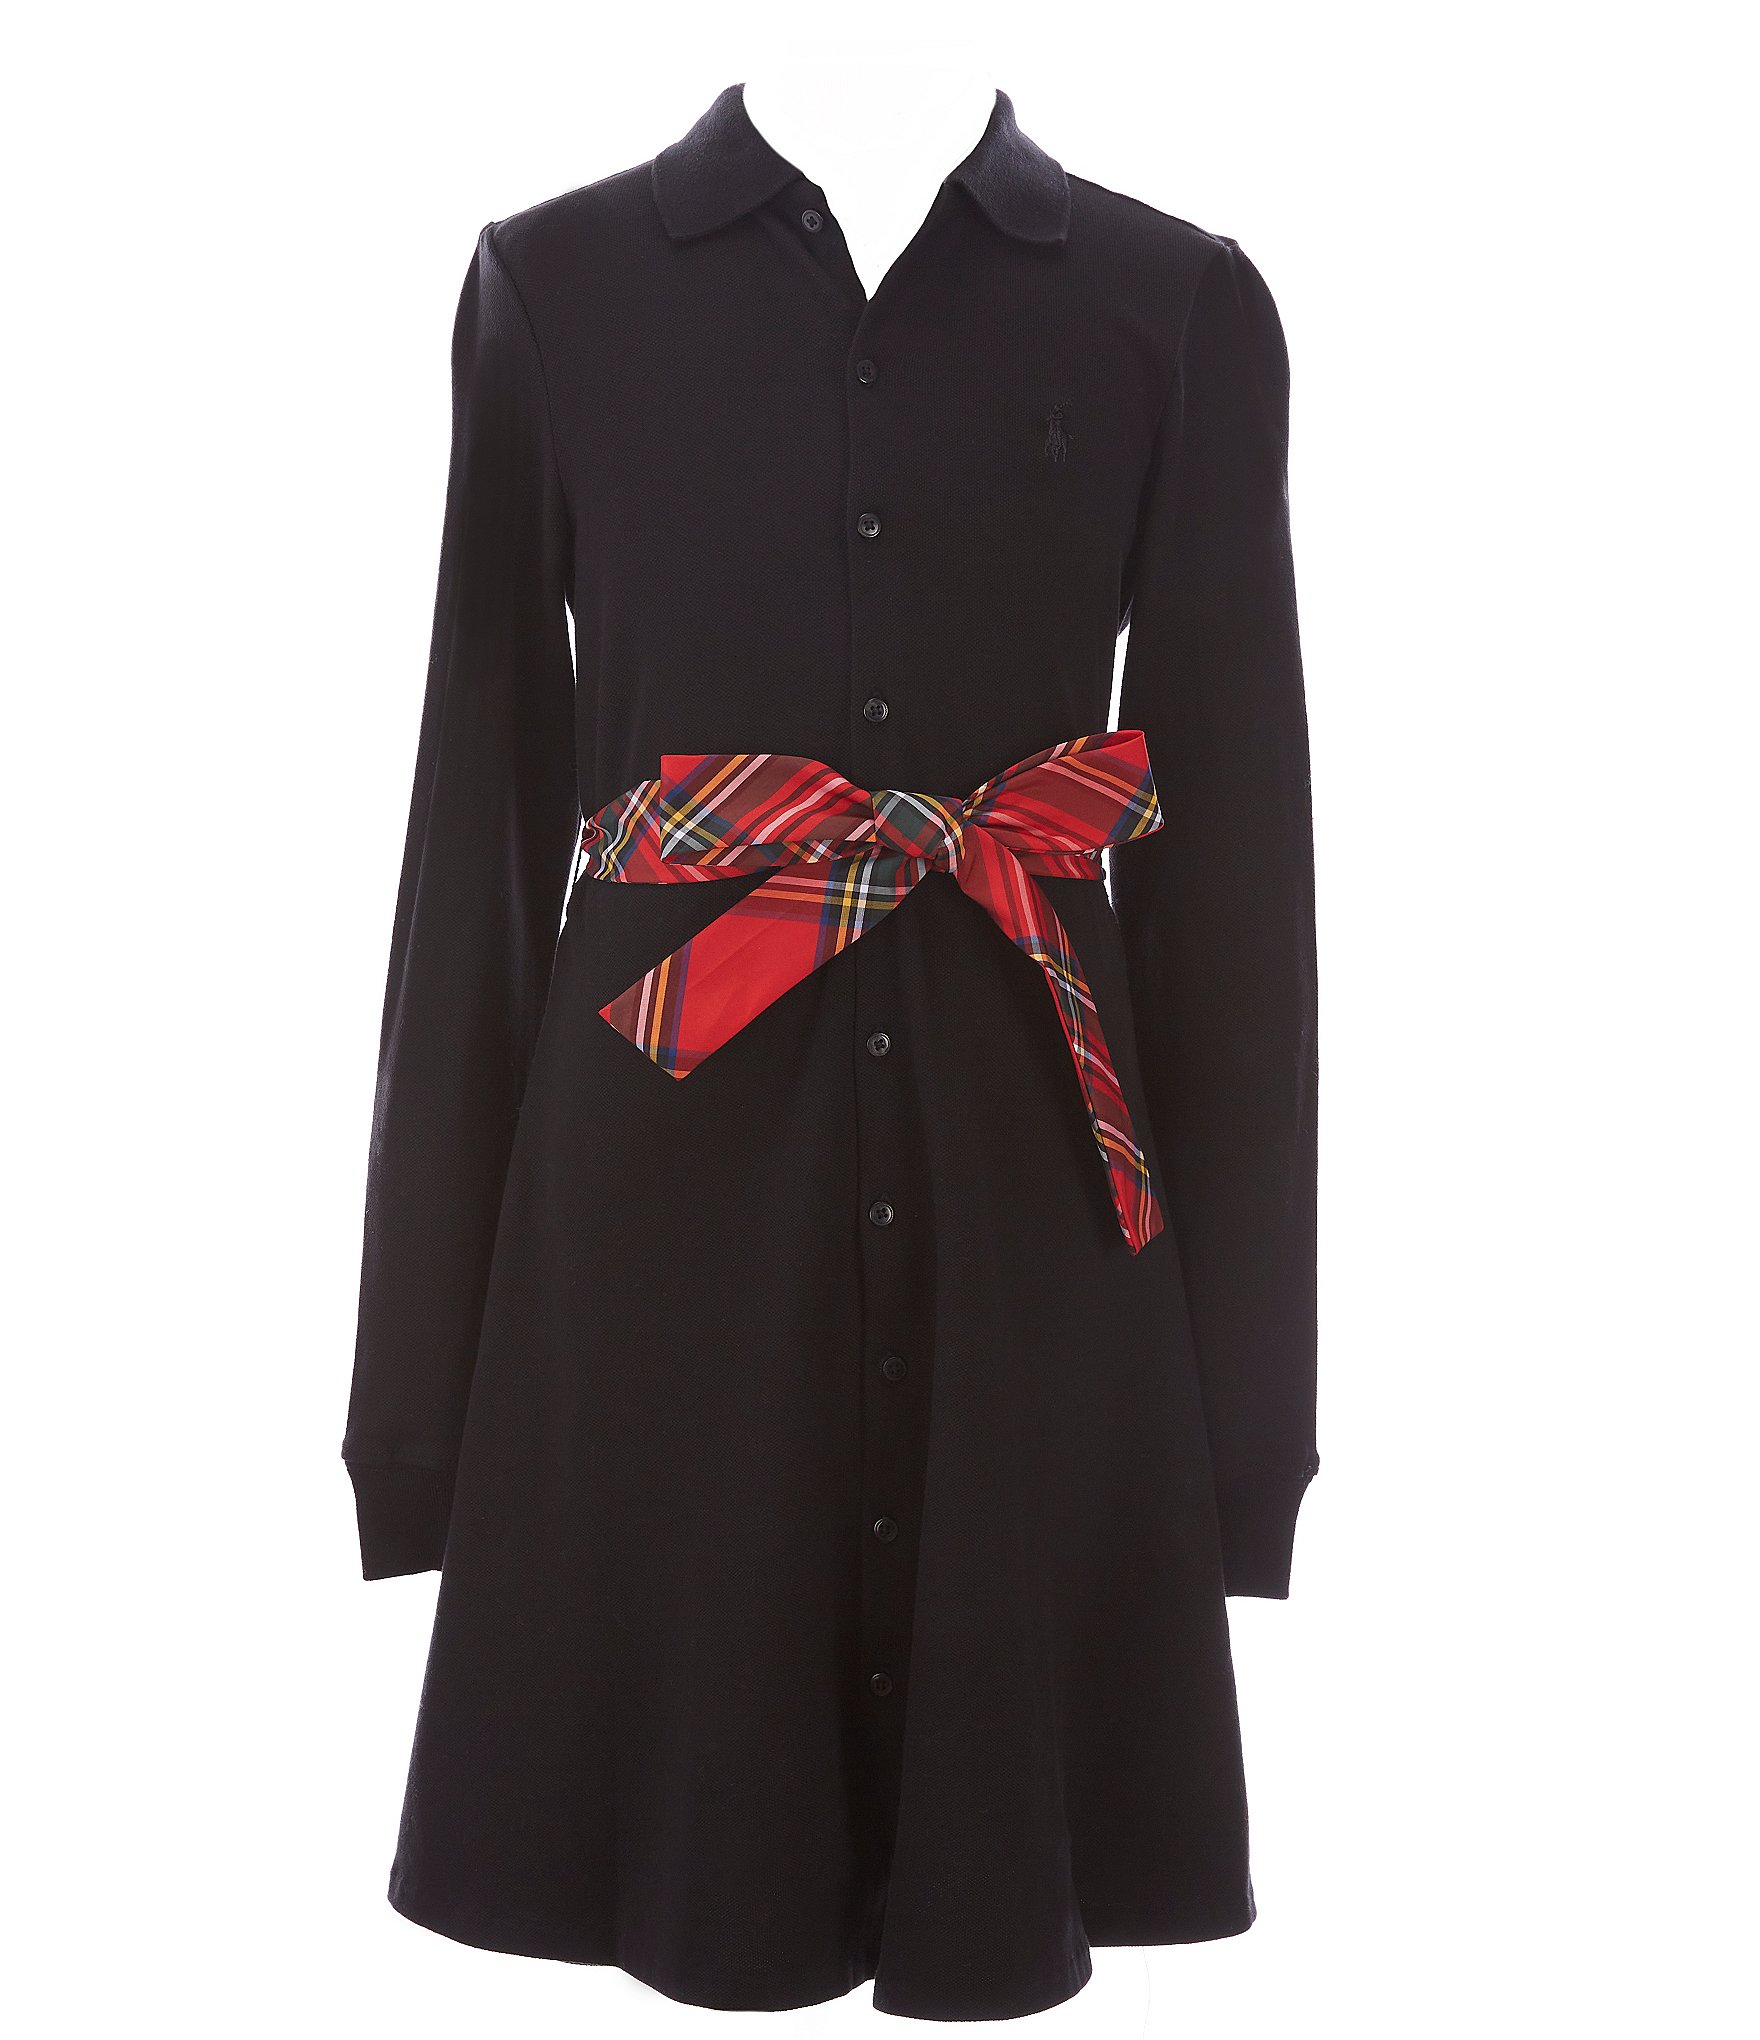 Preconception receive caress Polo Ralph Lauren Big Girls 7-16 Long-Sleeve Plaid-Sash Knit Oxford  Fit-And-Flare Dress | Dillard's